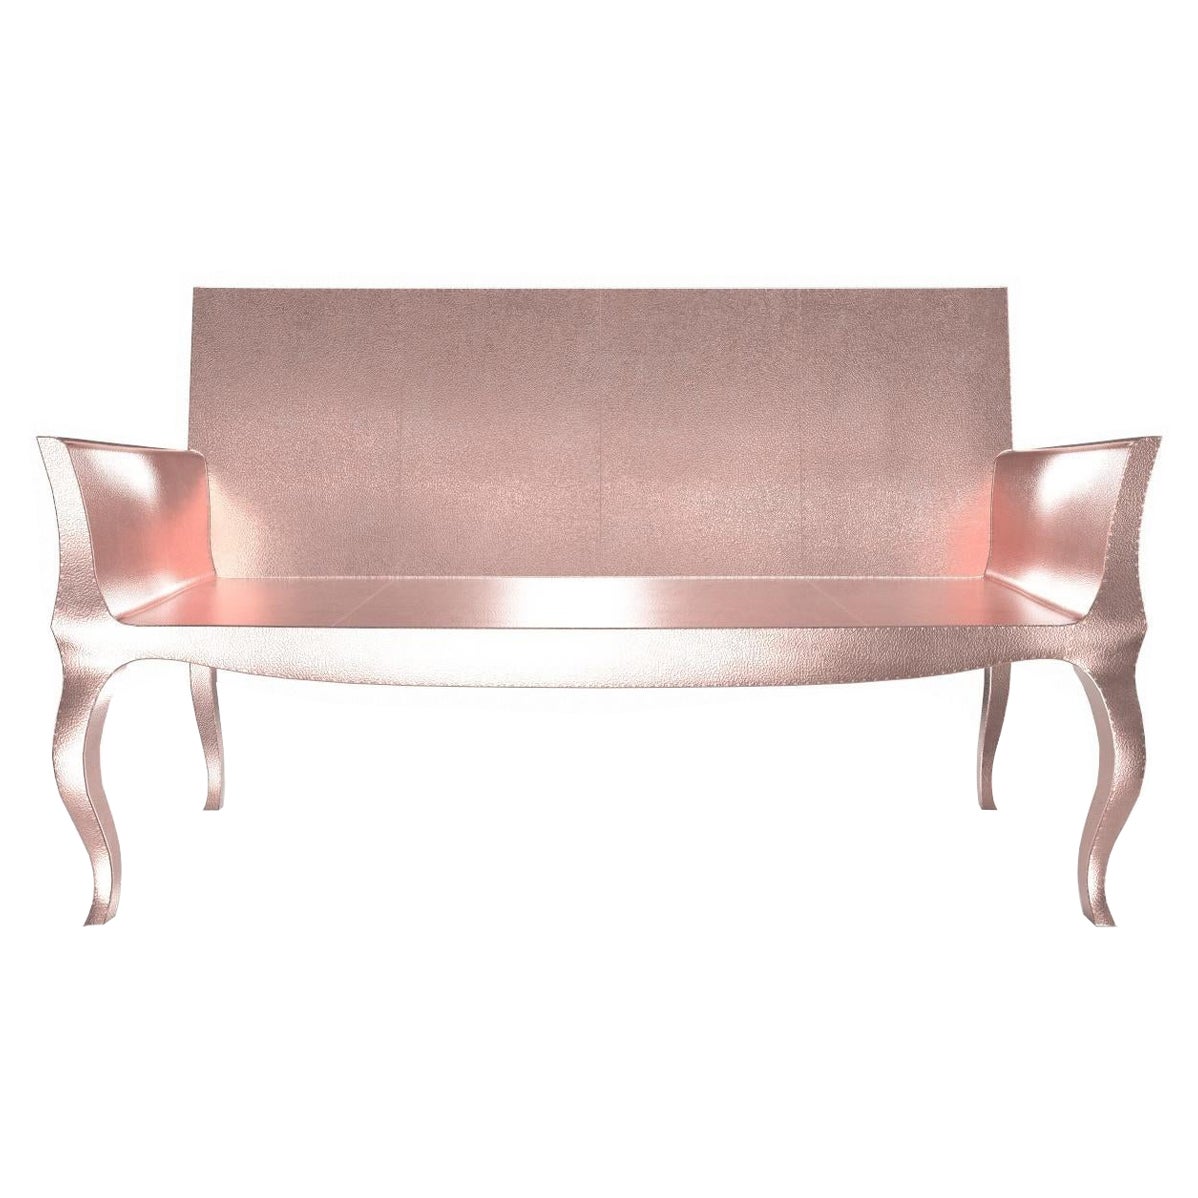 Louise Settee Art Deco Canapes in Fine Hammered Copper by Paul Mathieu